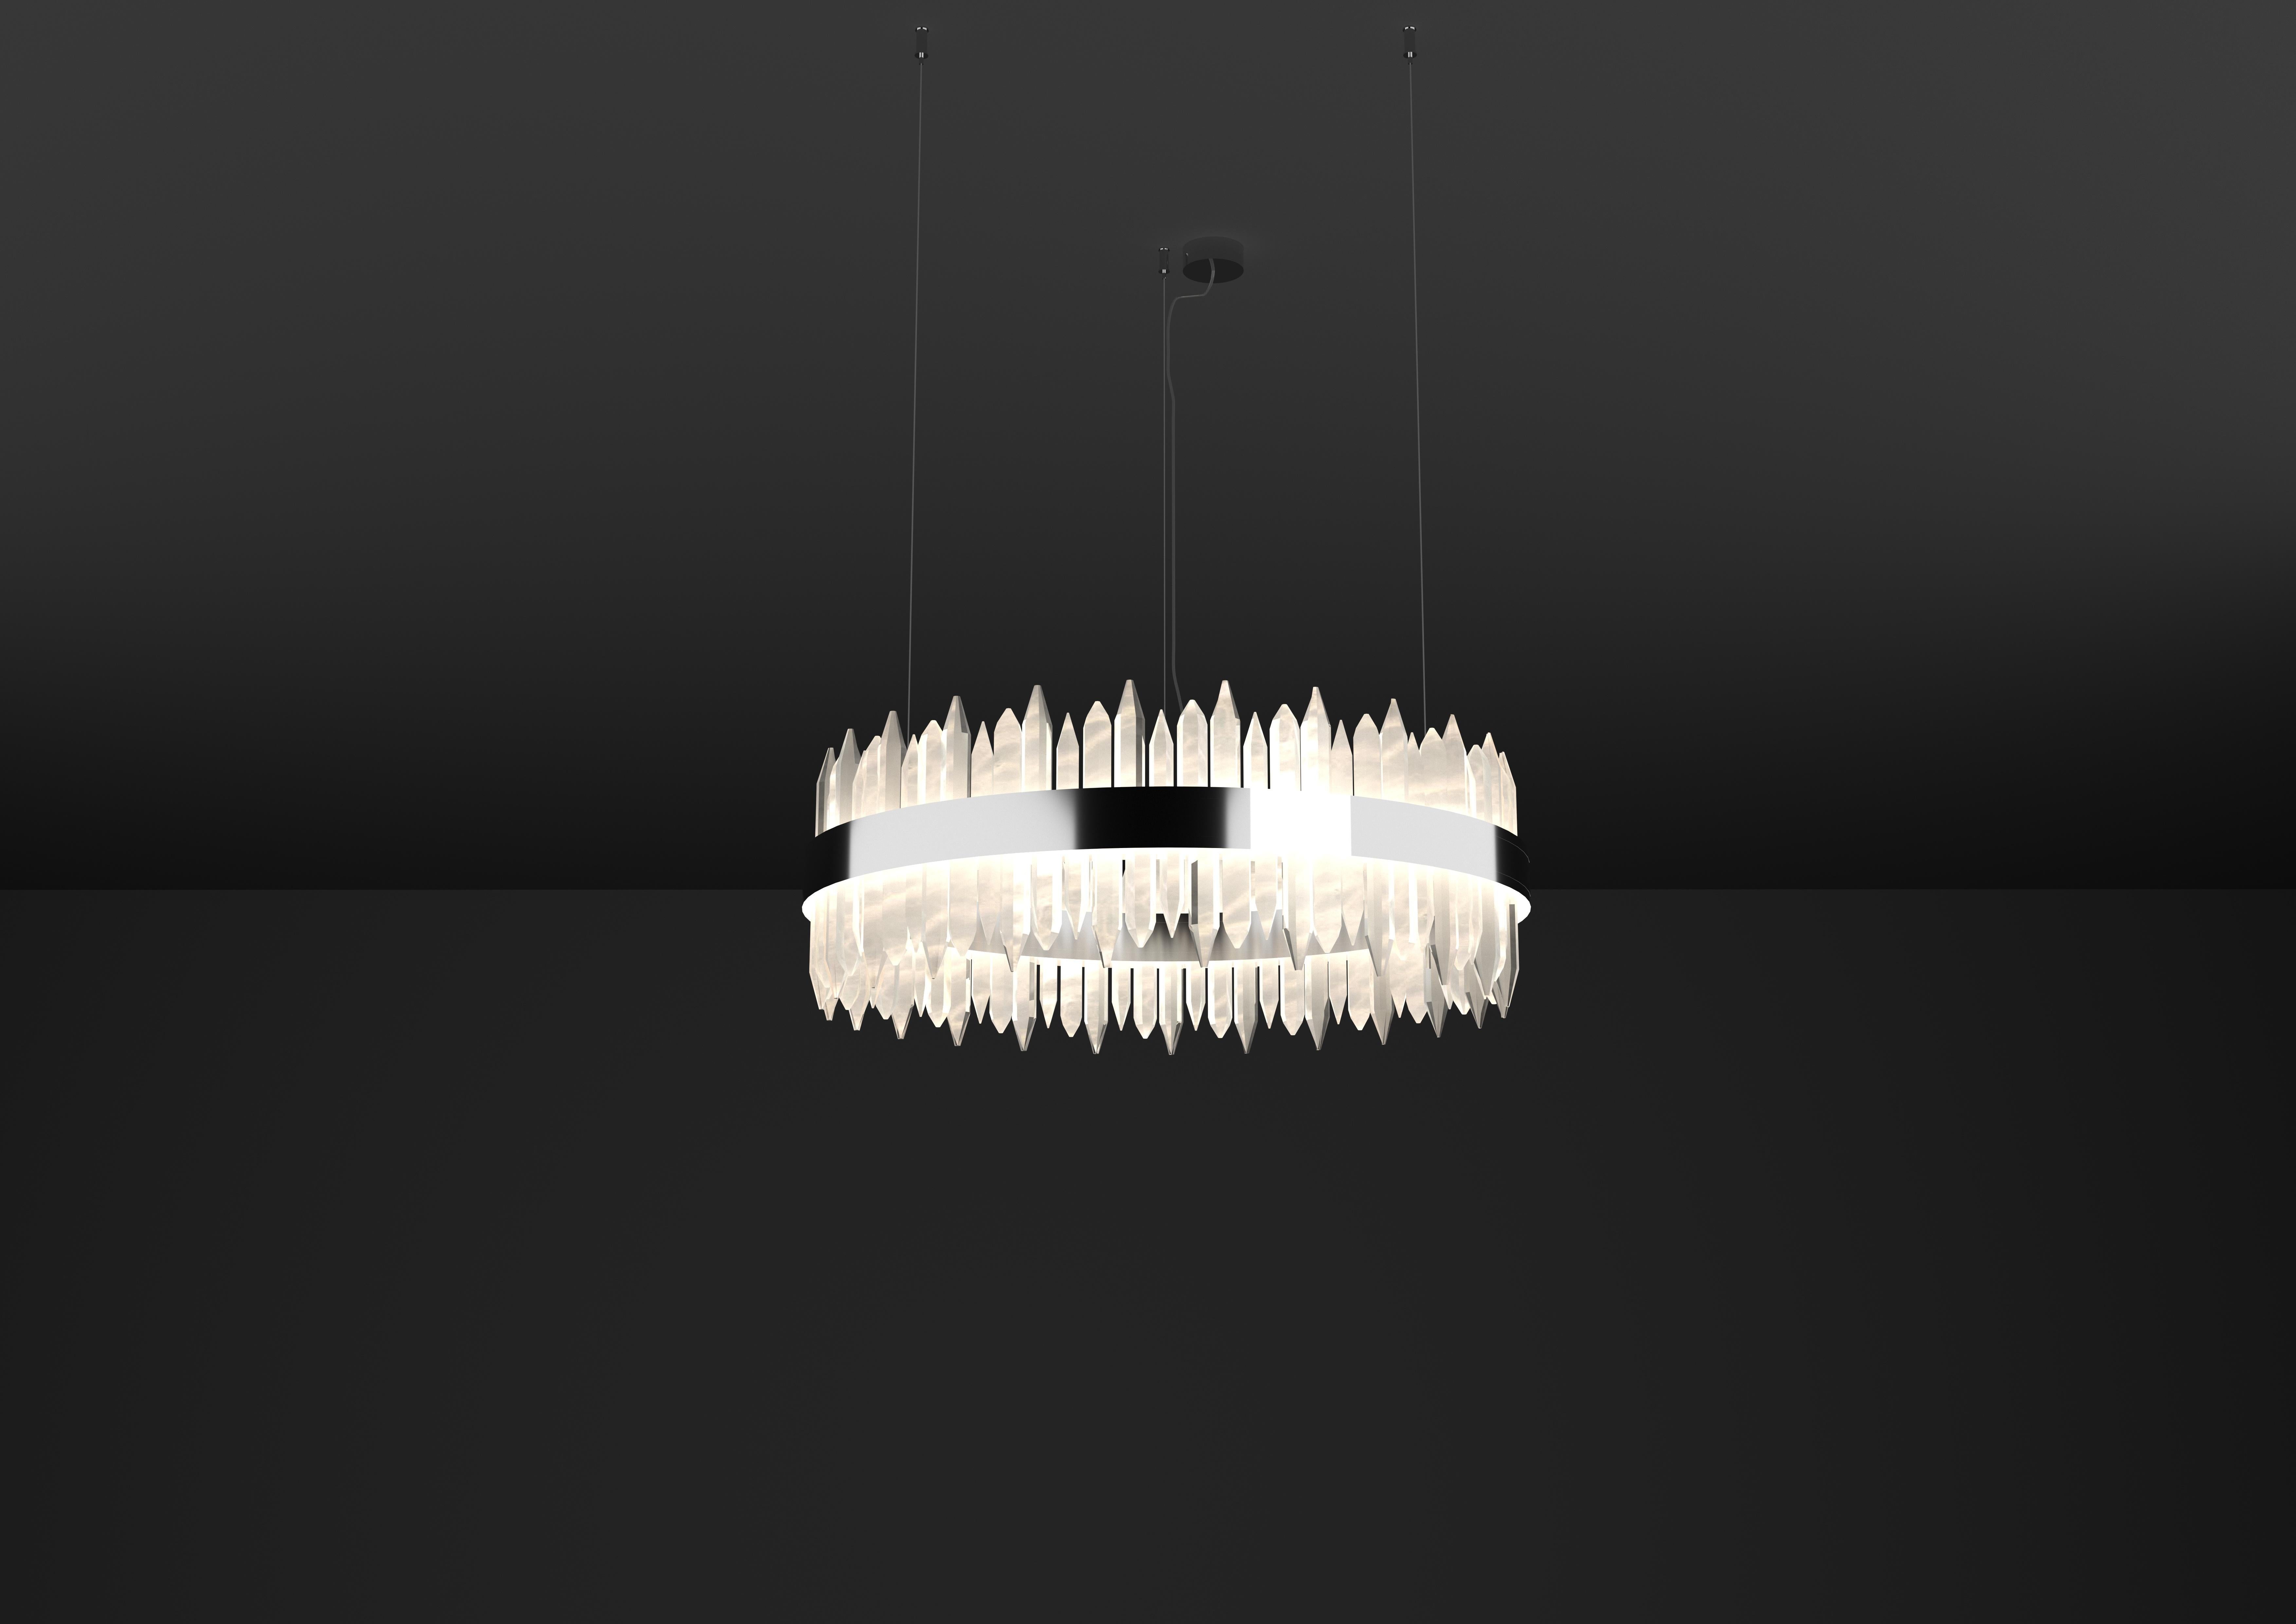 Urano Shiny Silver 120 Pendant Light 2 by Alabastro Italiano
Dimensions: Ø 120 x H 34 cm.
Materials: Glass and shiny silver metal.

2 x Strip LED, 162 Watt 16286 Lumen, 24 V, 3000 K.

Available in different sizes: Ø 60, Ø 80, Ø 100 and Ø 120